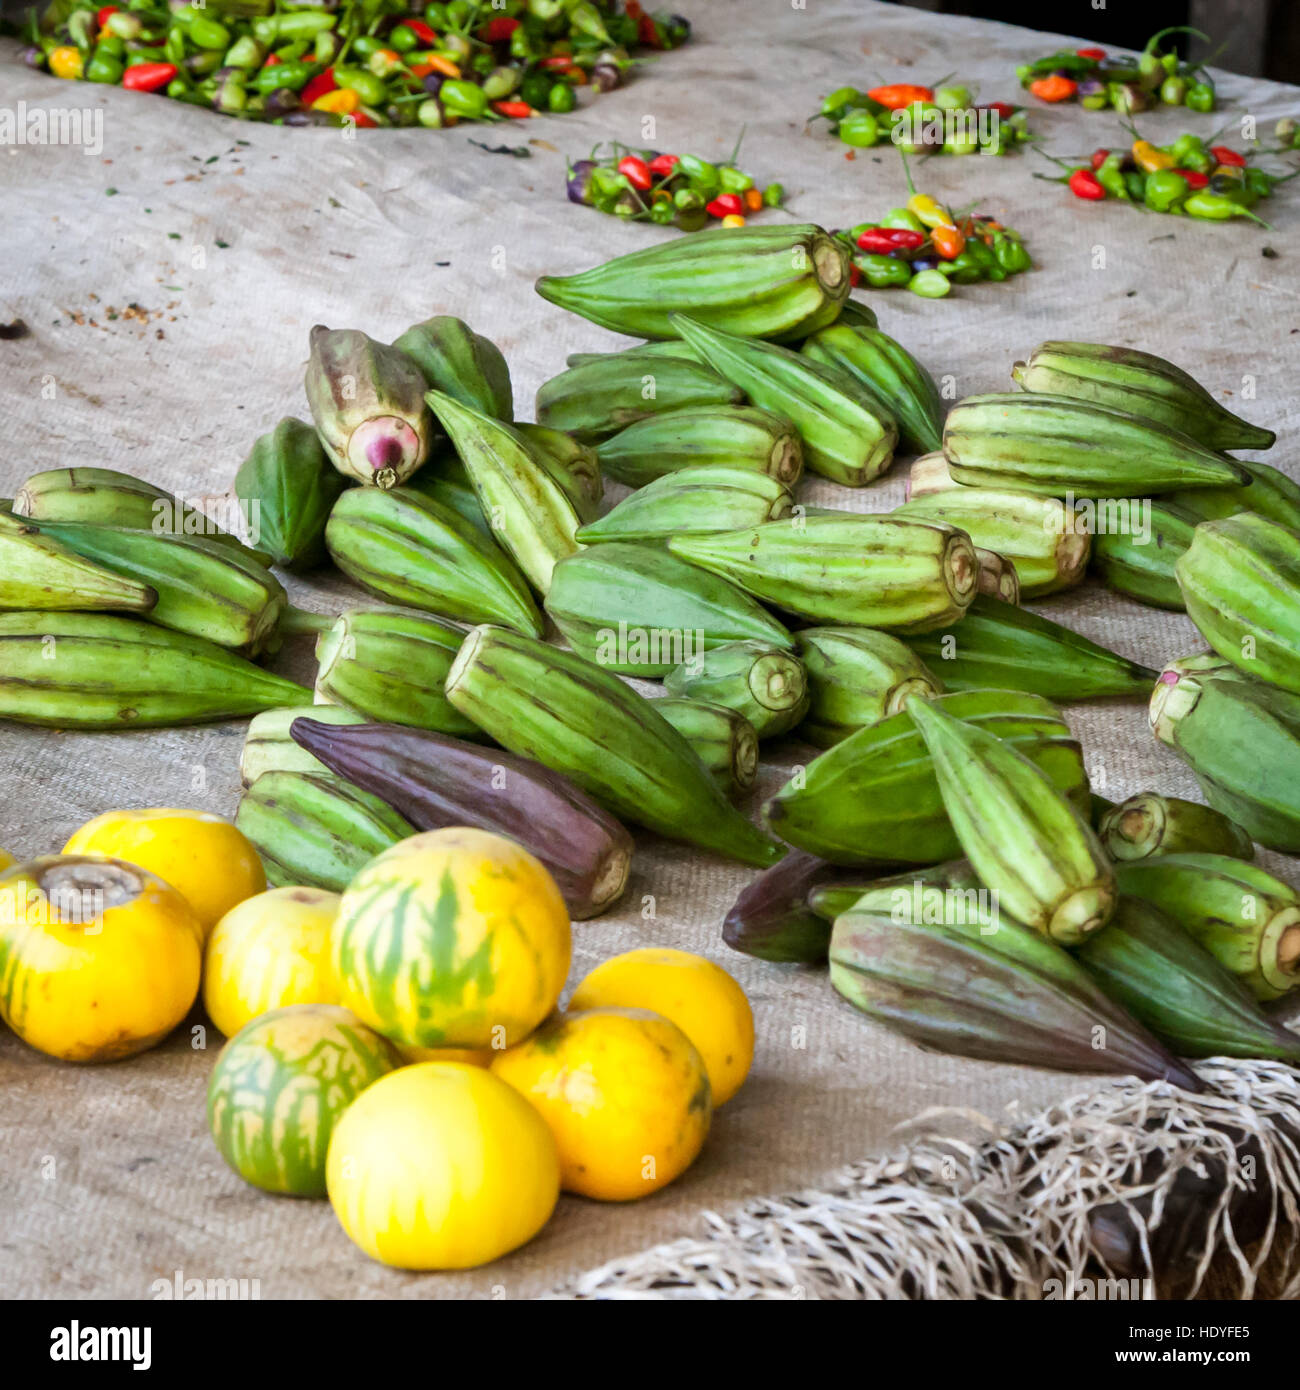 Vegetables in a market of Sierra Leone Stock Photo